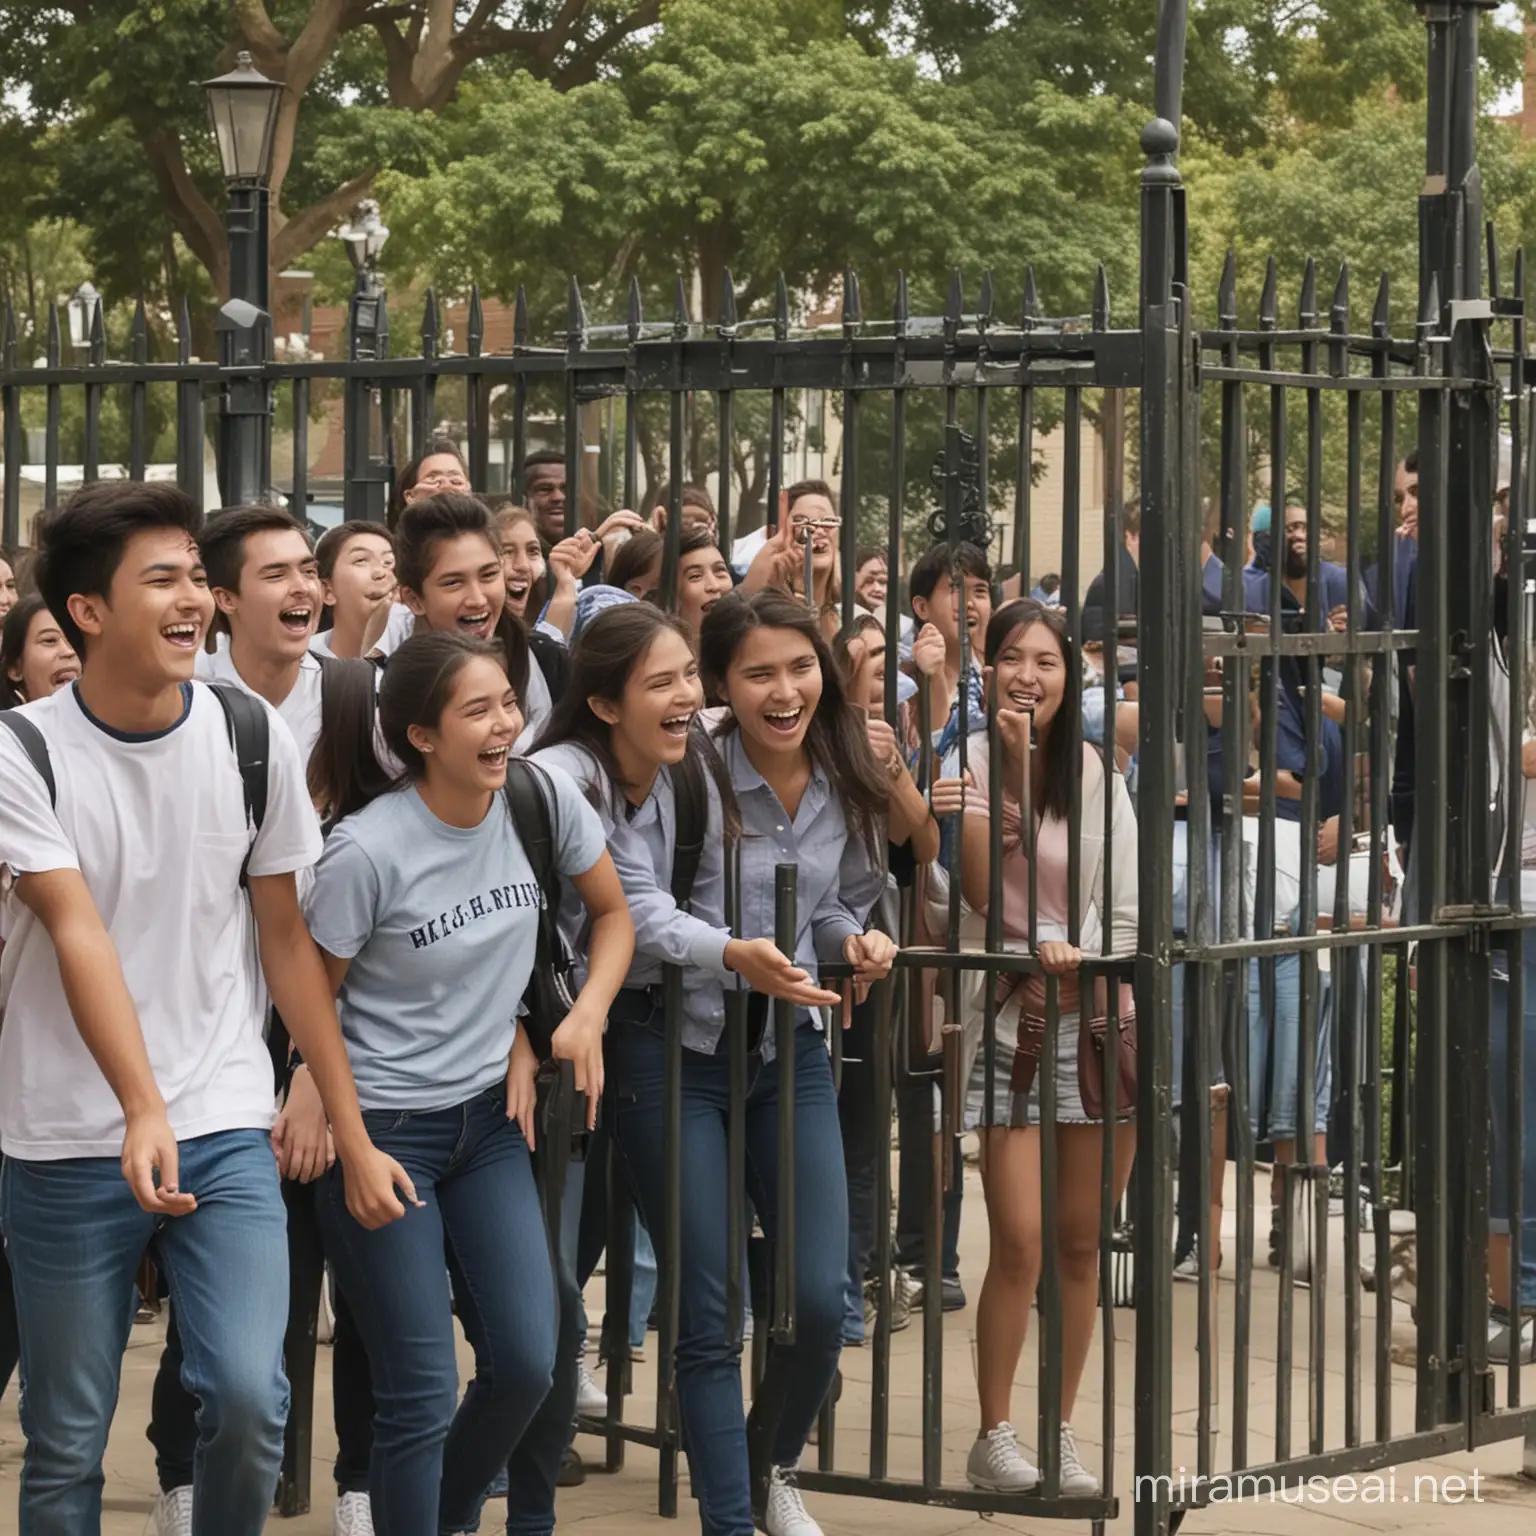 bunch of college students entering the college laughing
show the entry from the gate